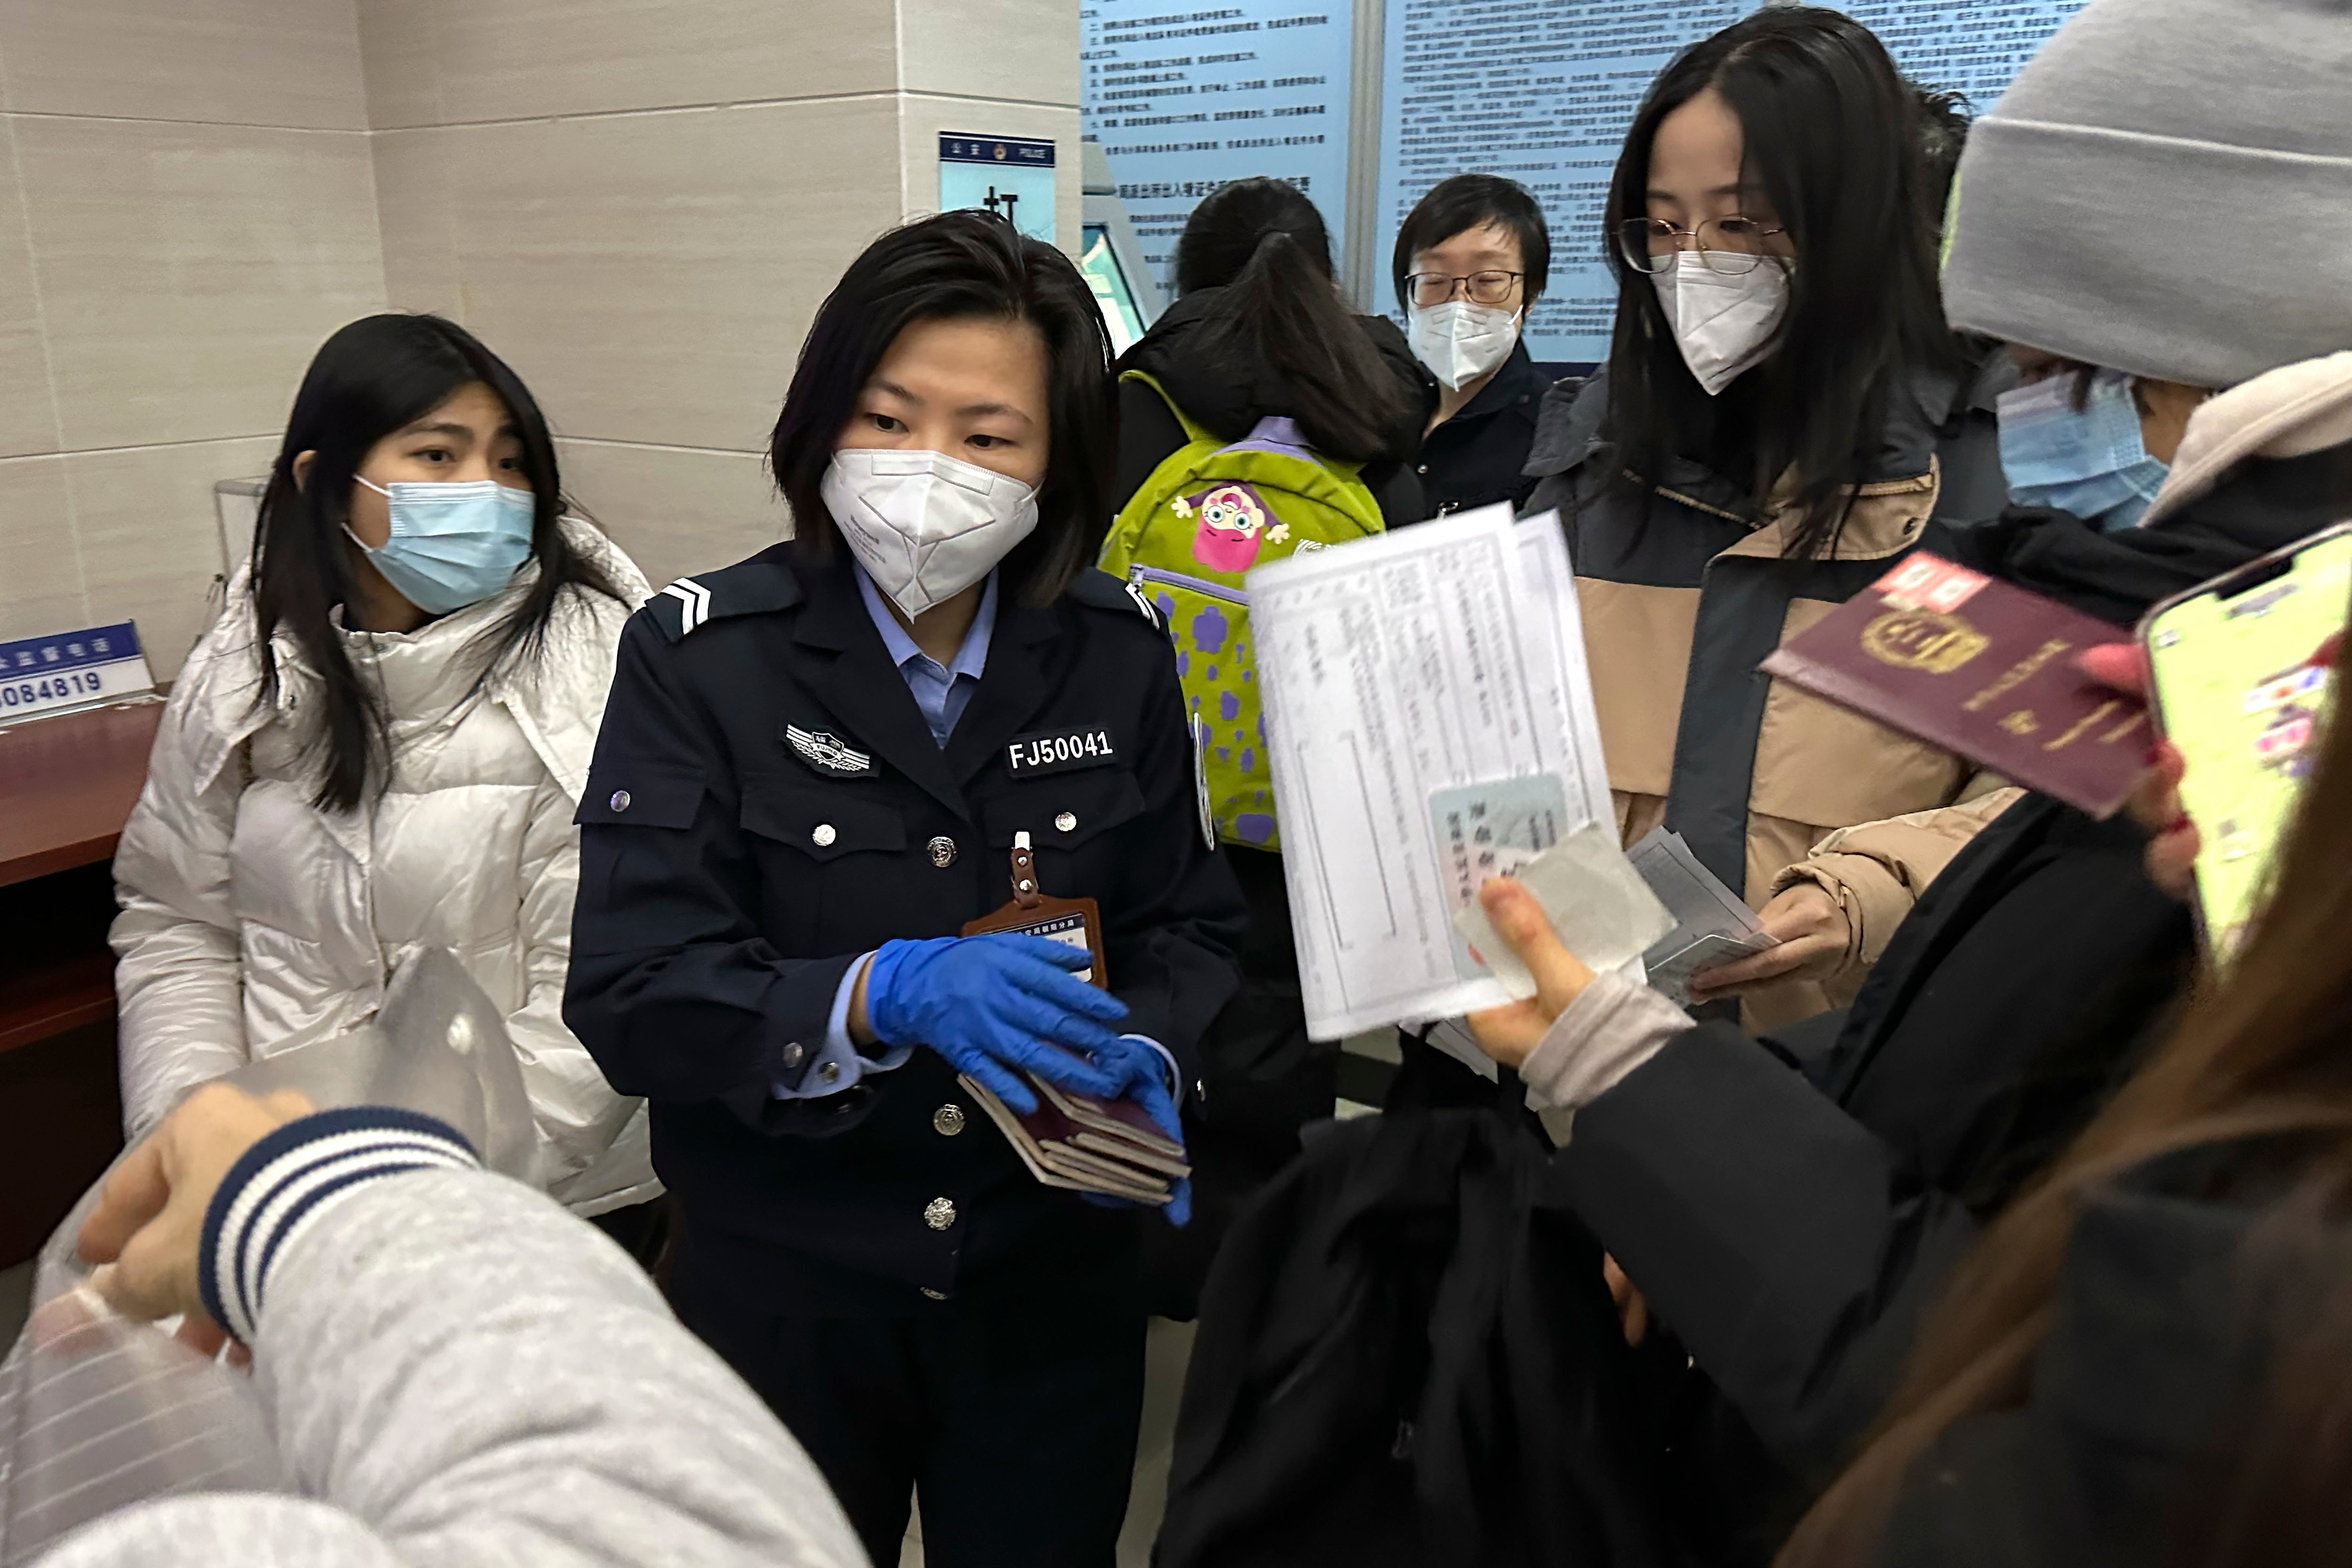 Infections have been on the rise in China